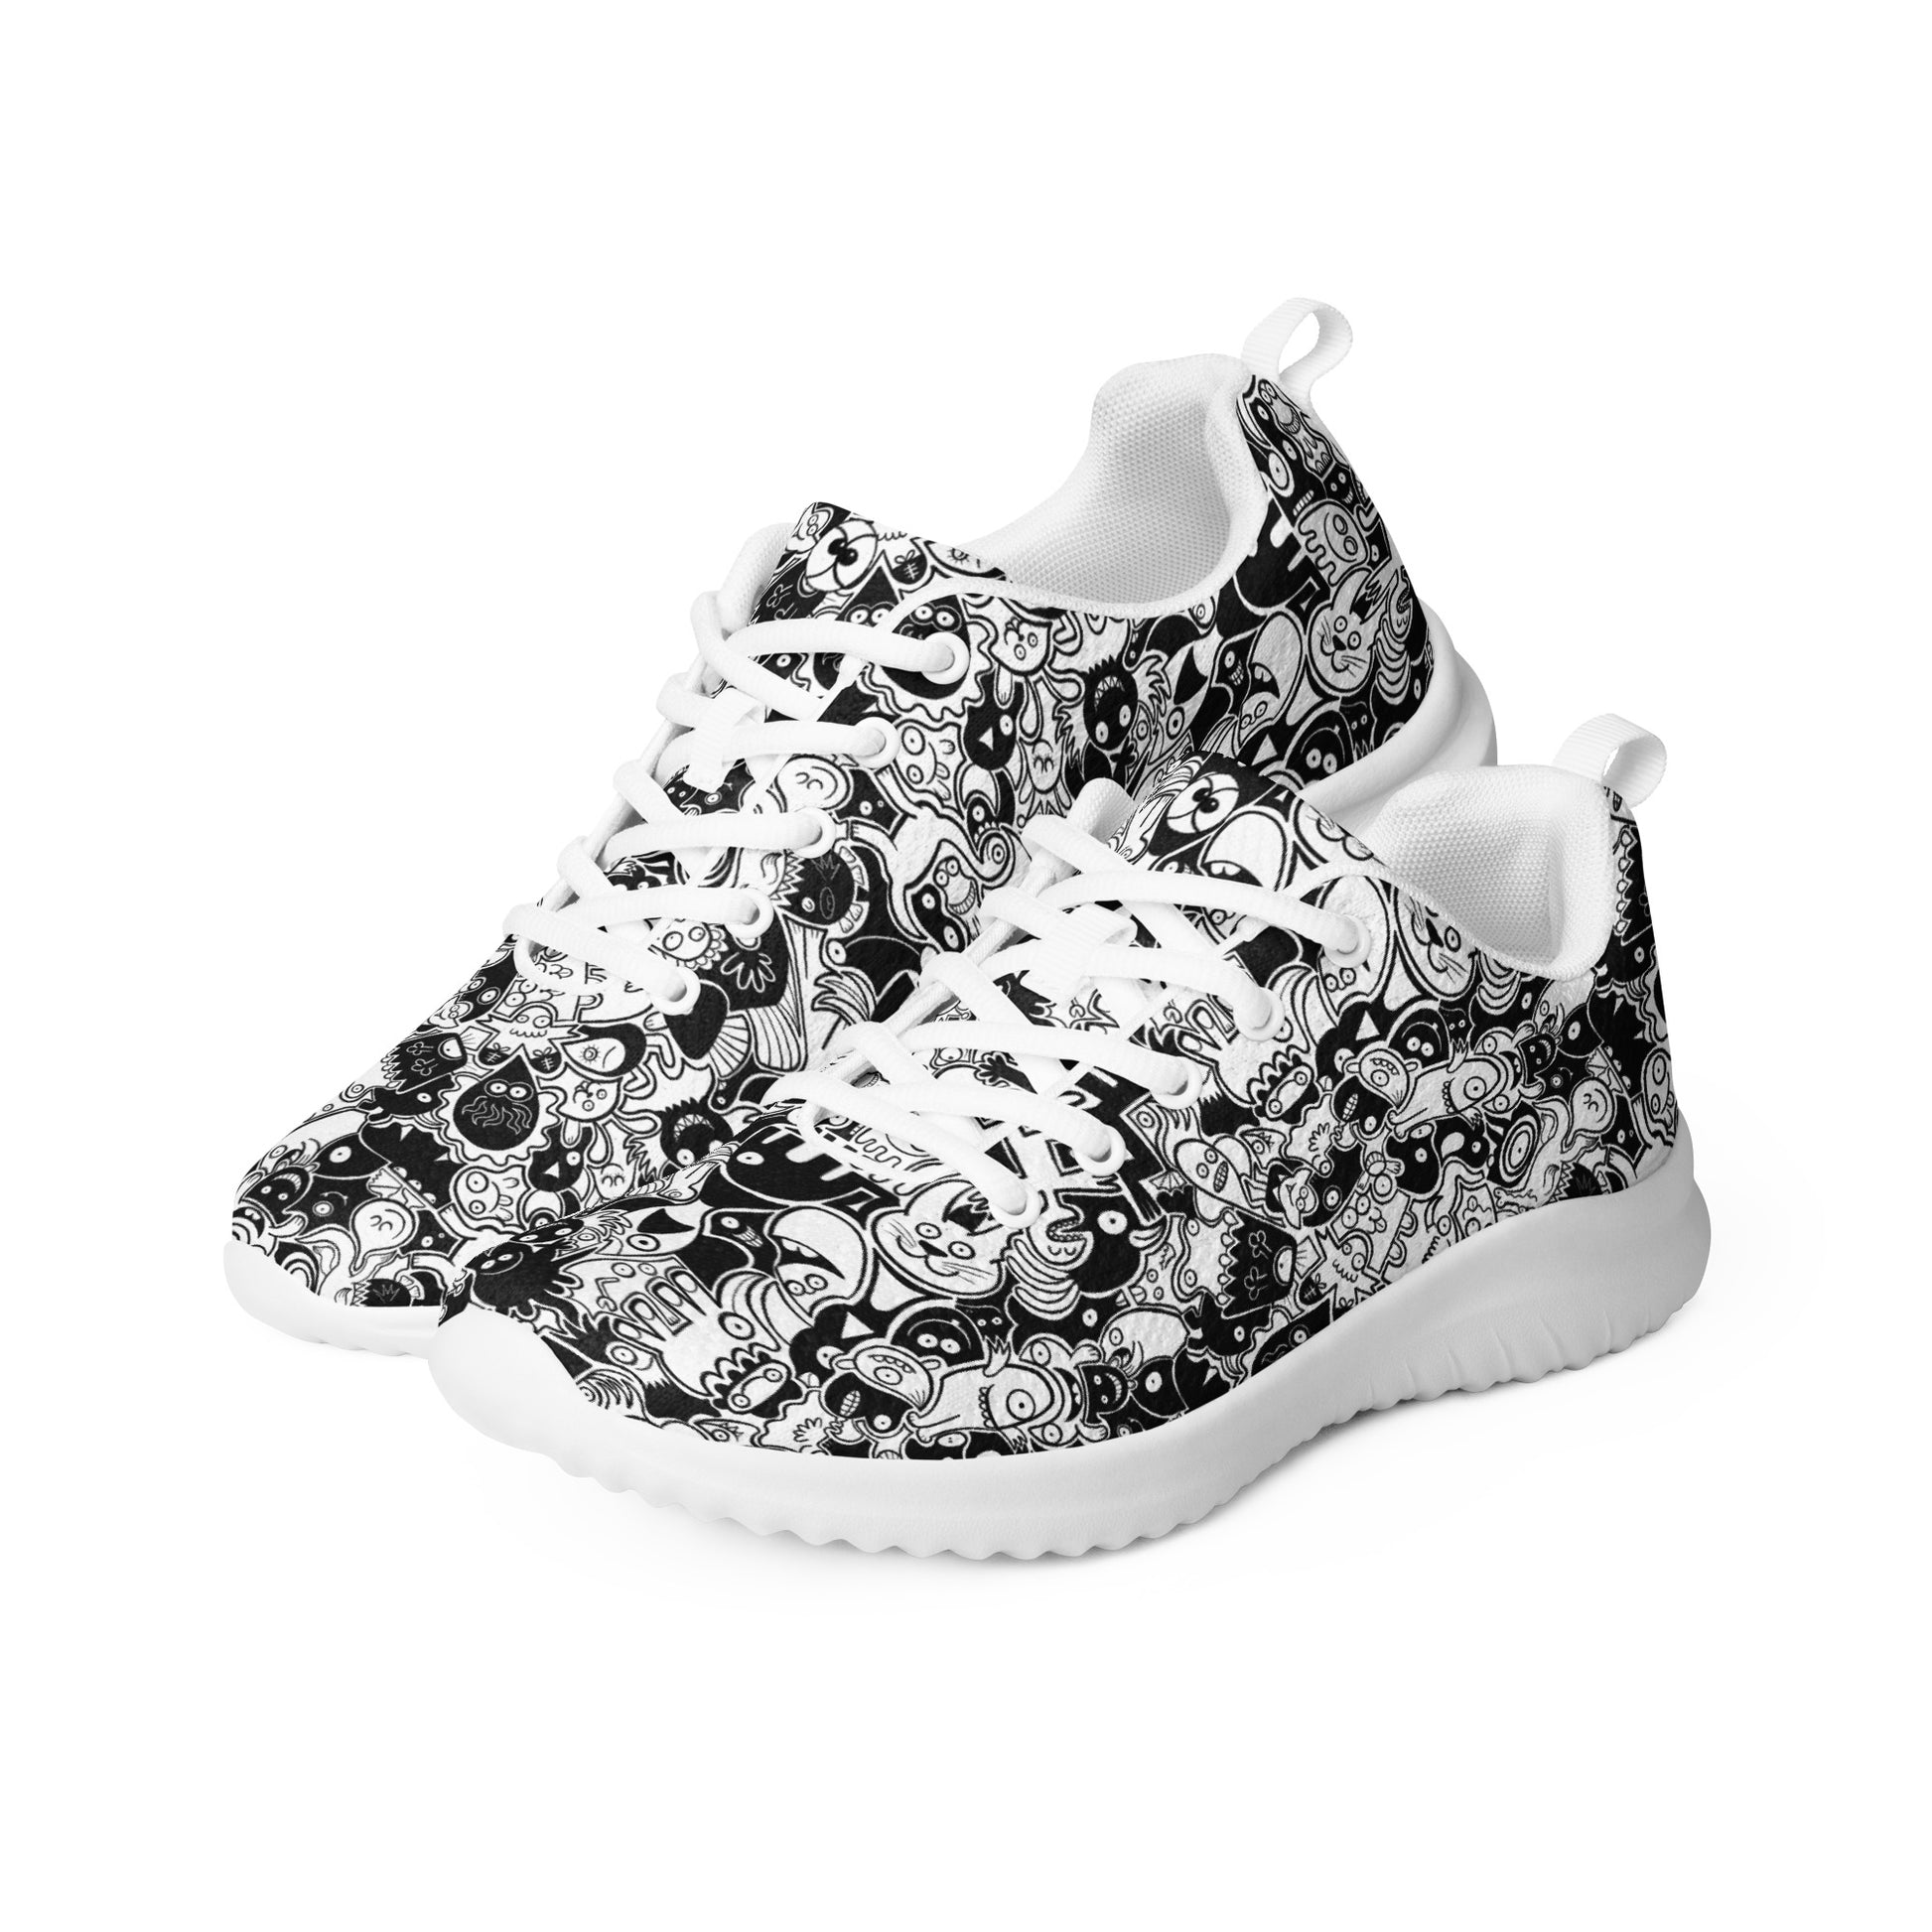 Joyful crowd of black and white doodle creatures Women’s athletic shoes. Overview